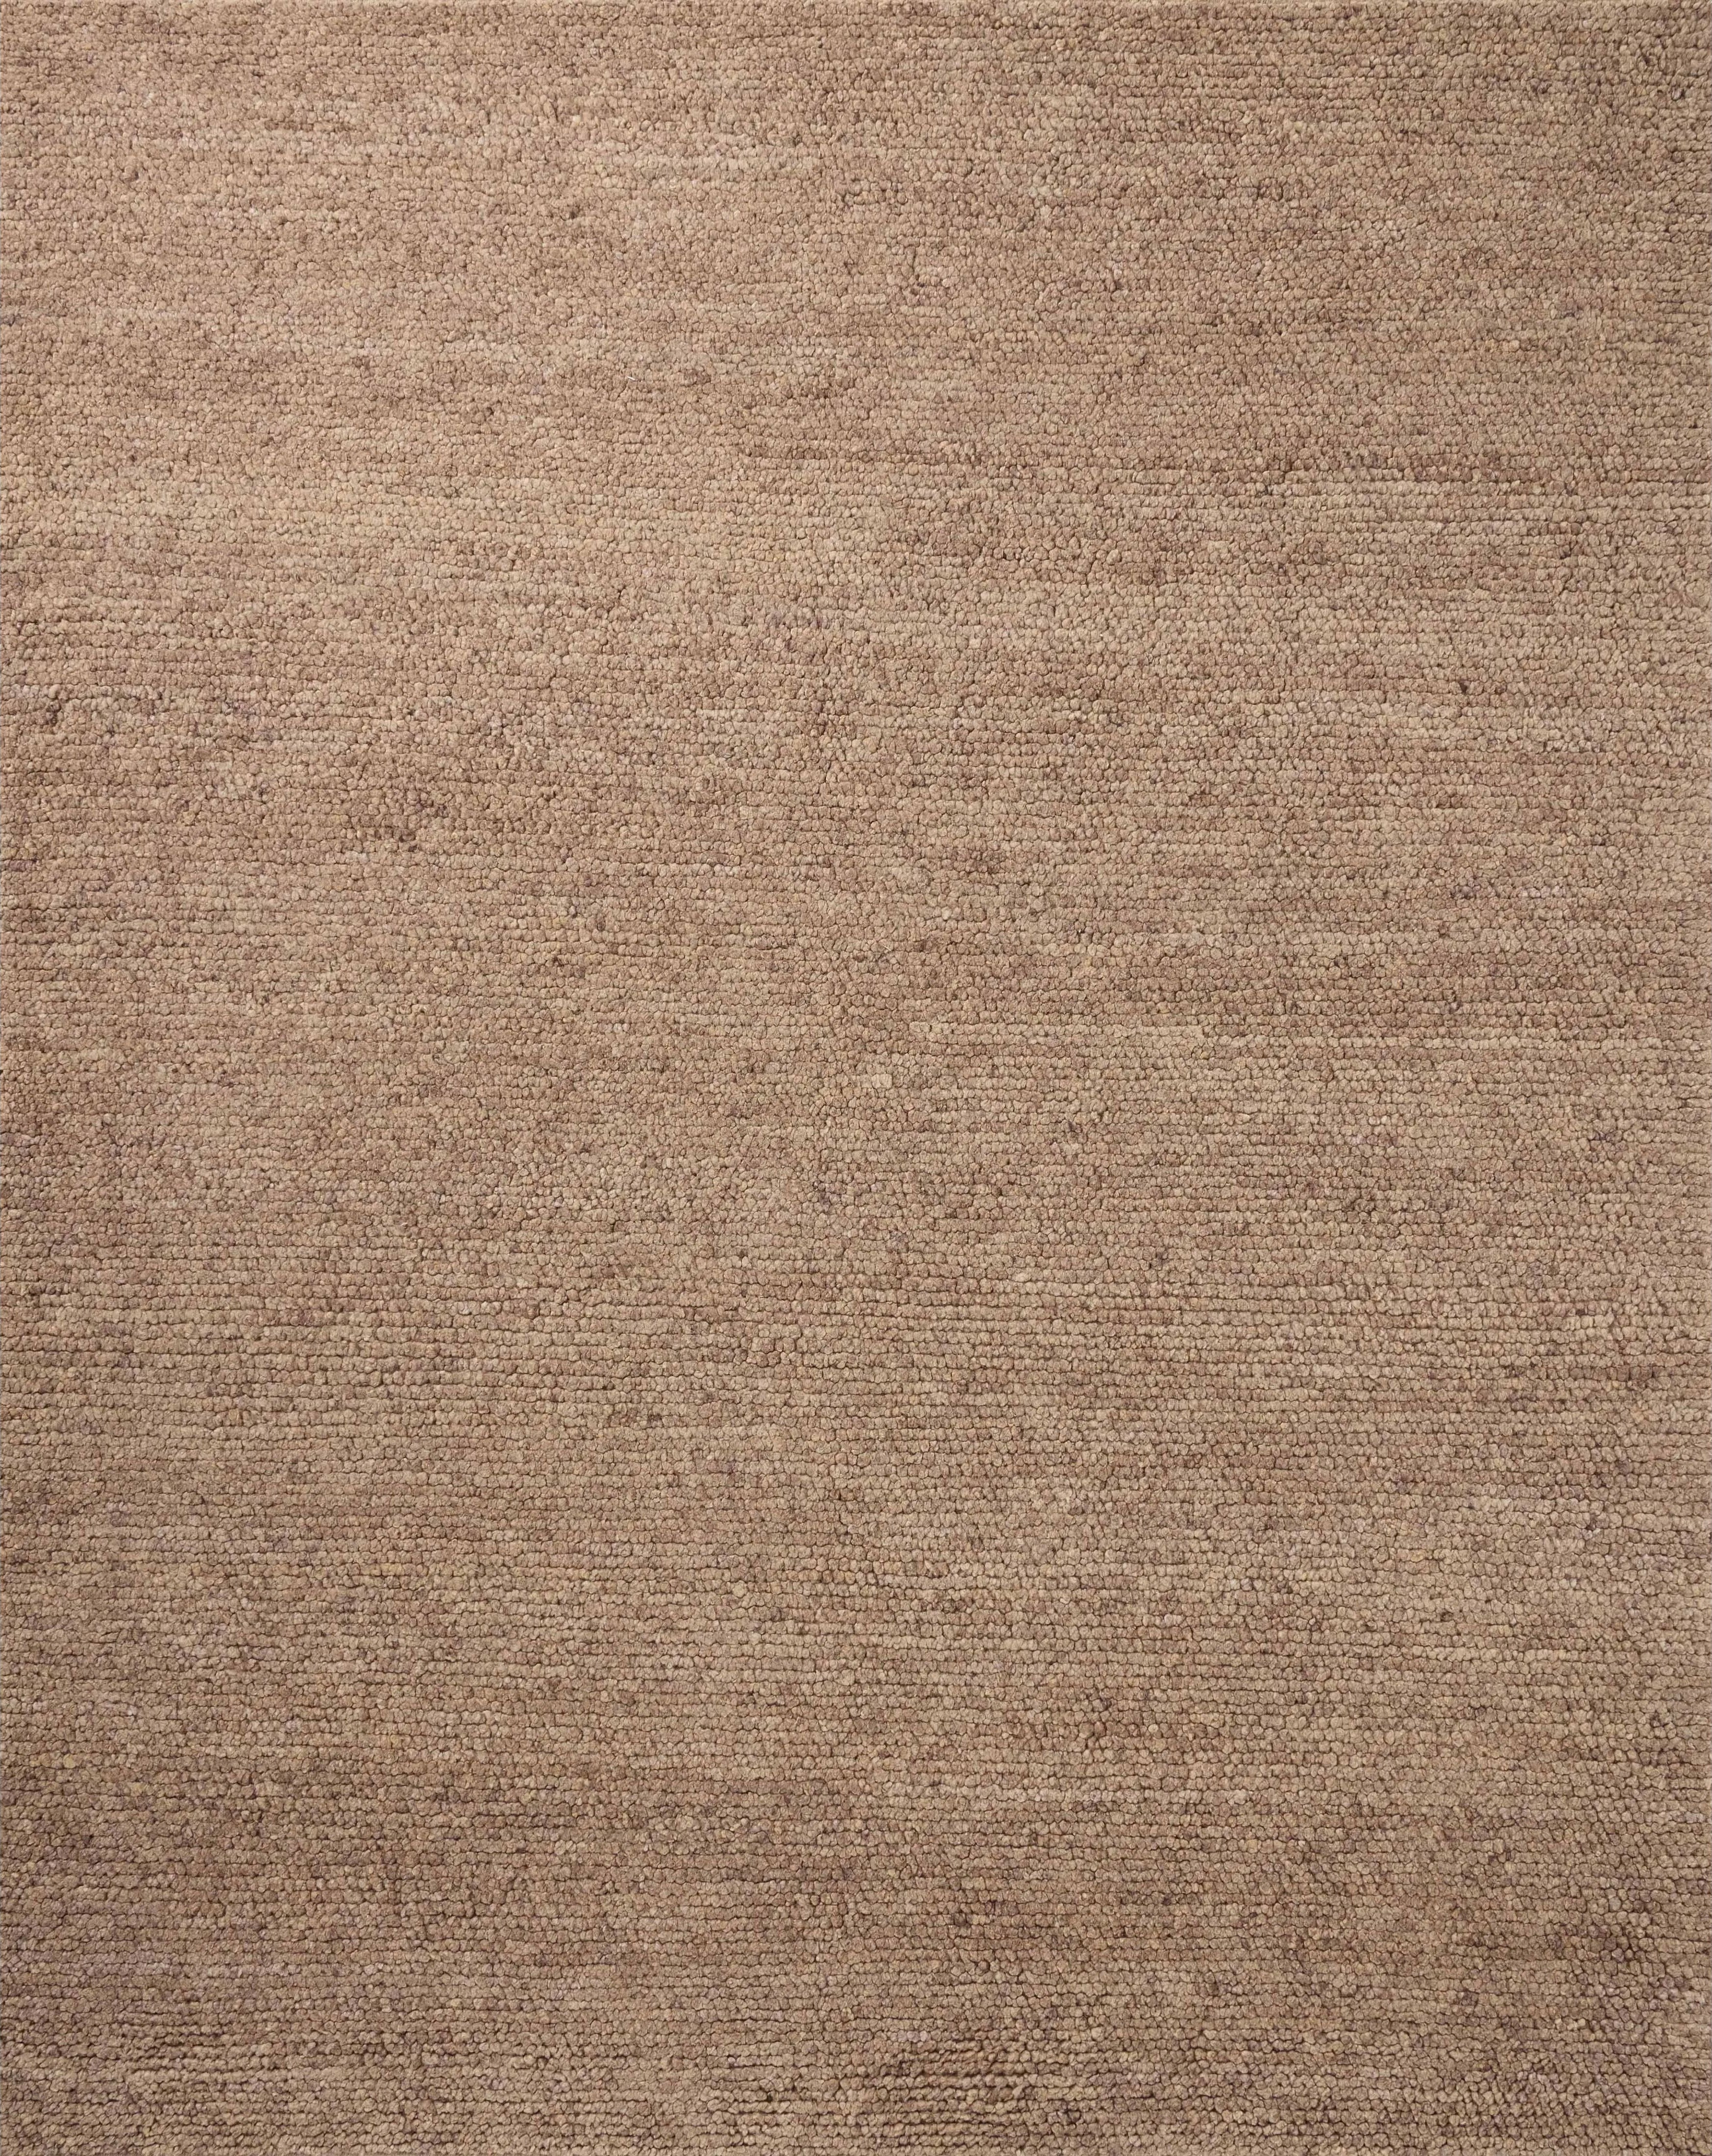 With versatile earth tones and a chunky, hand-knotted texture resembling tiny pebbles, the Frida Dark Taupe Rug by Brigette Romanek x Loloi can ground any room with a sense of elevated ease. Each area rug features a subtle nuance in color variation due to the handmade nature of its construction and has a pleasantly nubby softness underfoot. Amethyst Home provides interior design, new home construction design consulting, vintage area rugs, and lighting in the Nashville metro area.